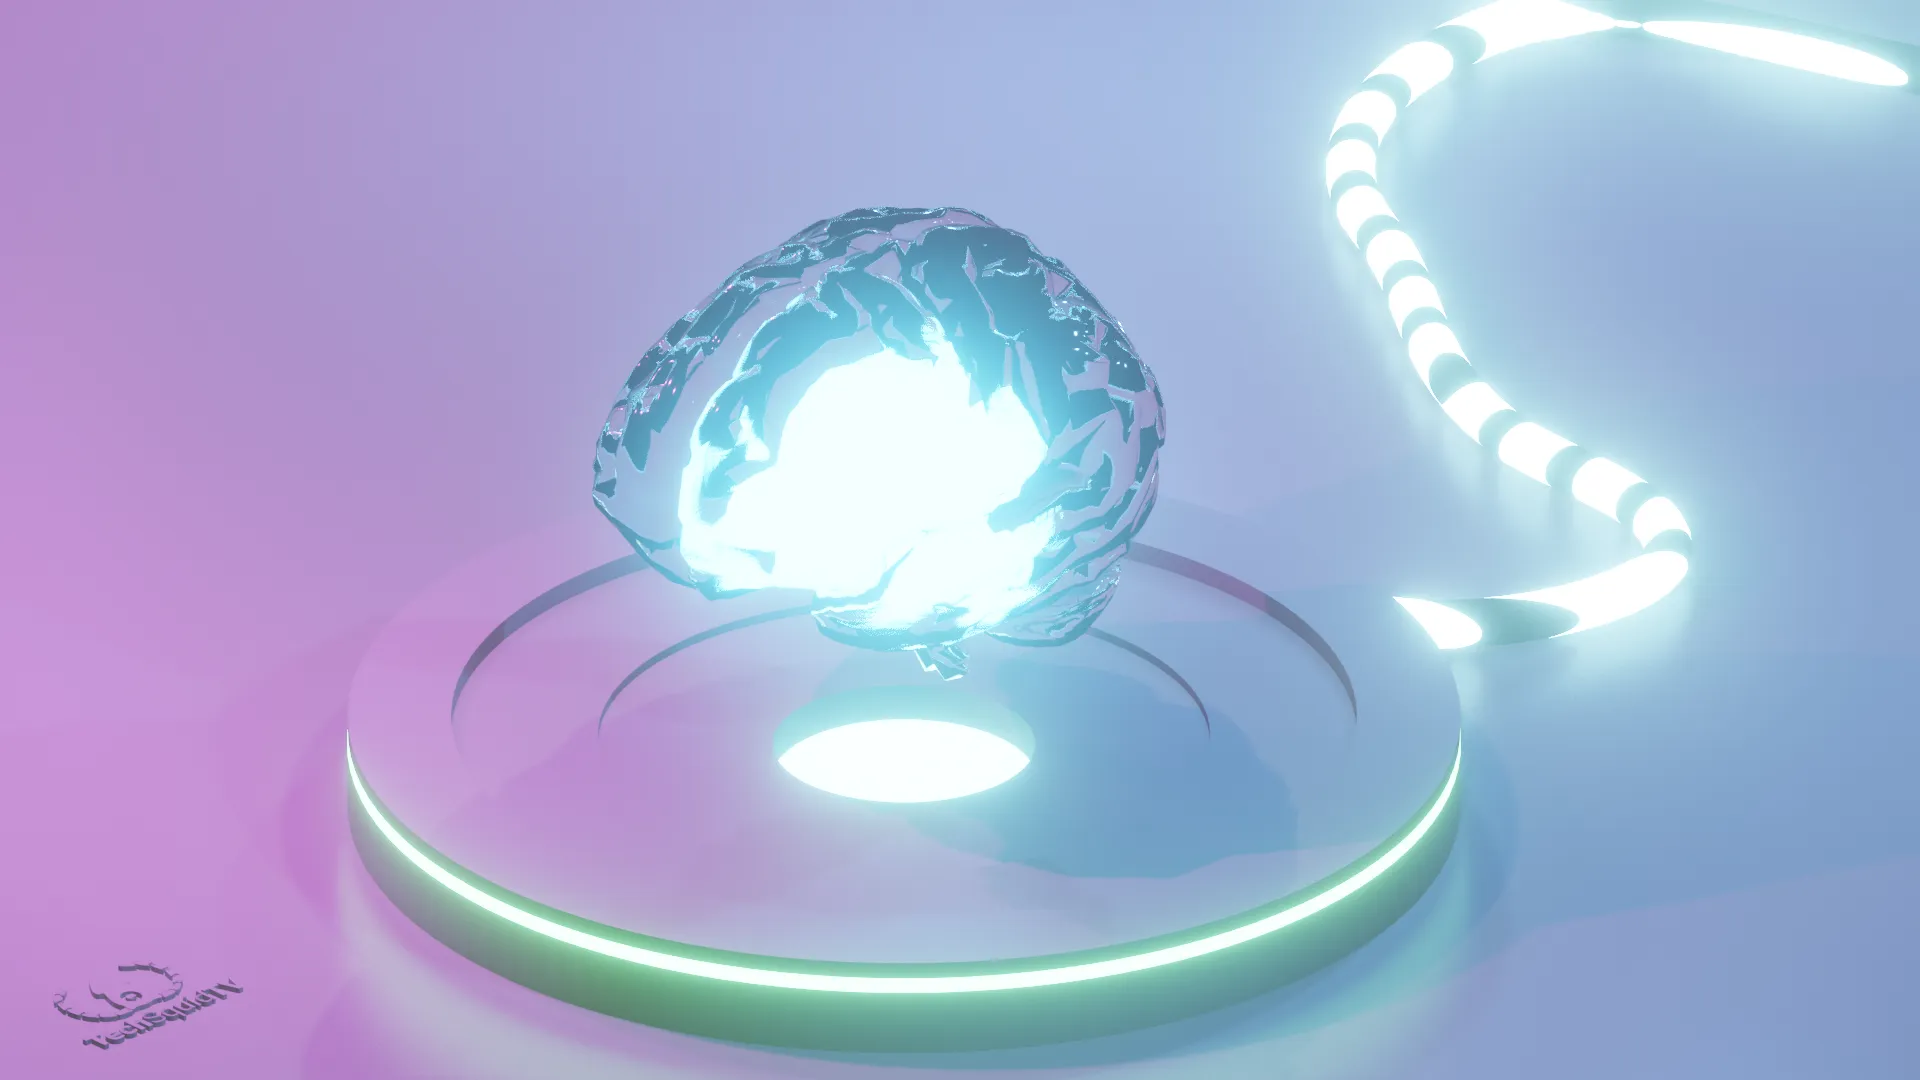 An abstract minimalist 3D rendering of a glass brain downloading information into a super computer. Image created by TechSquidTV in Blender.